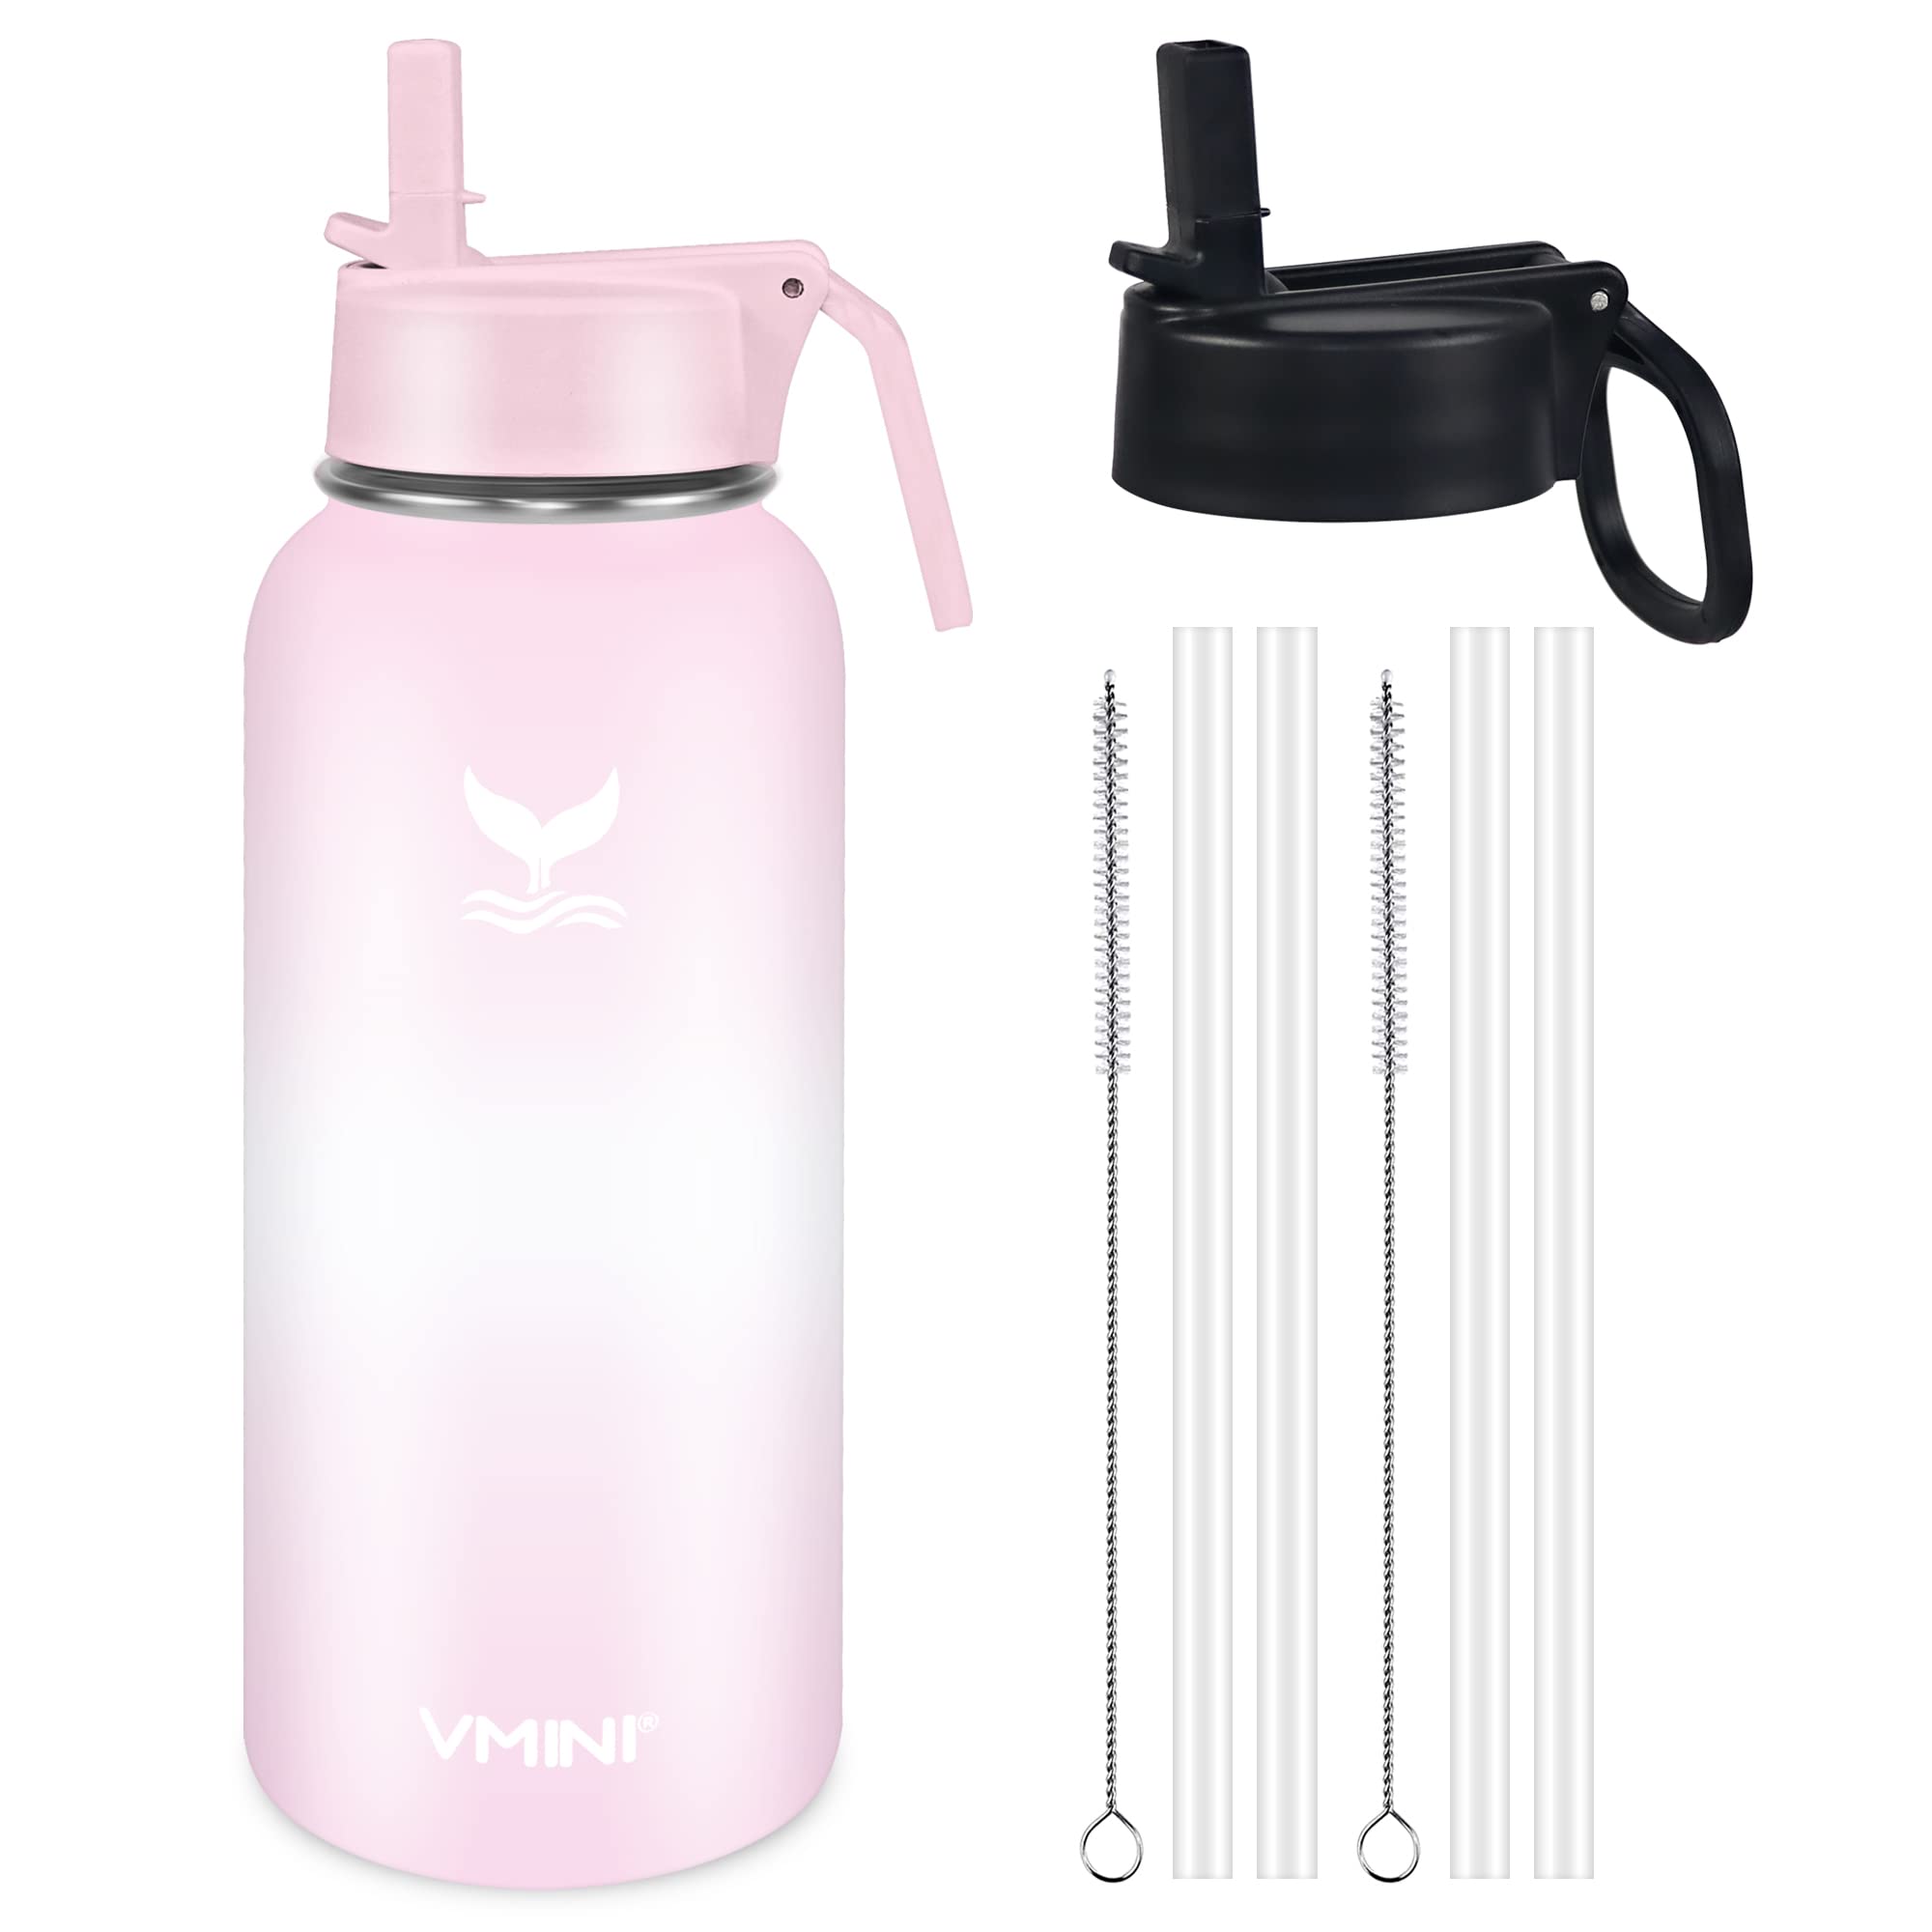 Vmini Water Bottle with New Wide Handle Straw Lid, Wide Mouth Vacuum Insulated 18/8 Stainless Steel, 4 Straws and 2 Brushes, 32 oz, Gradient Pink + White + Pink